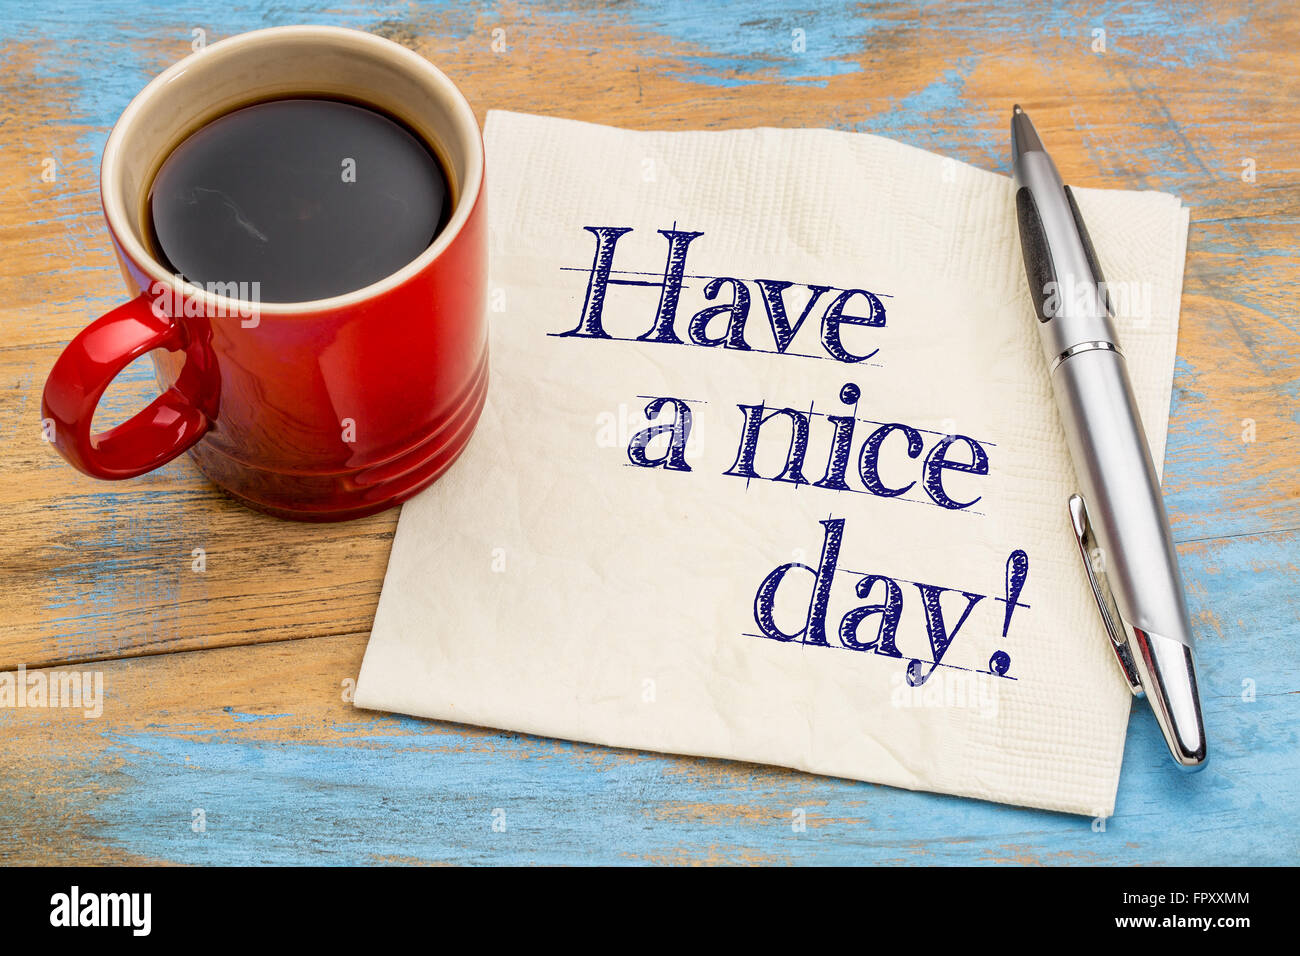 Have a nice day! Handwriting on a napkin with cup of ...